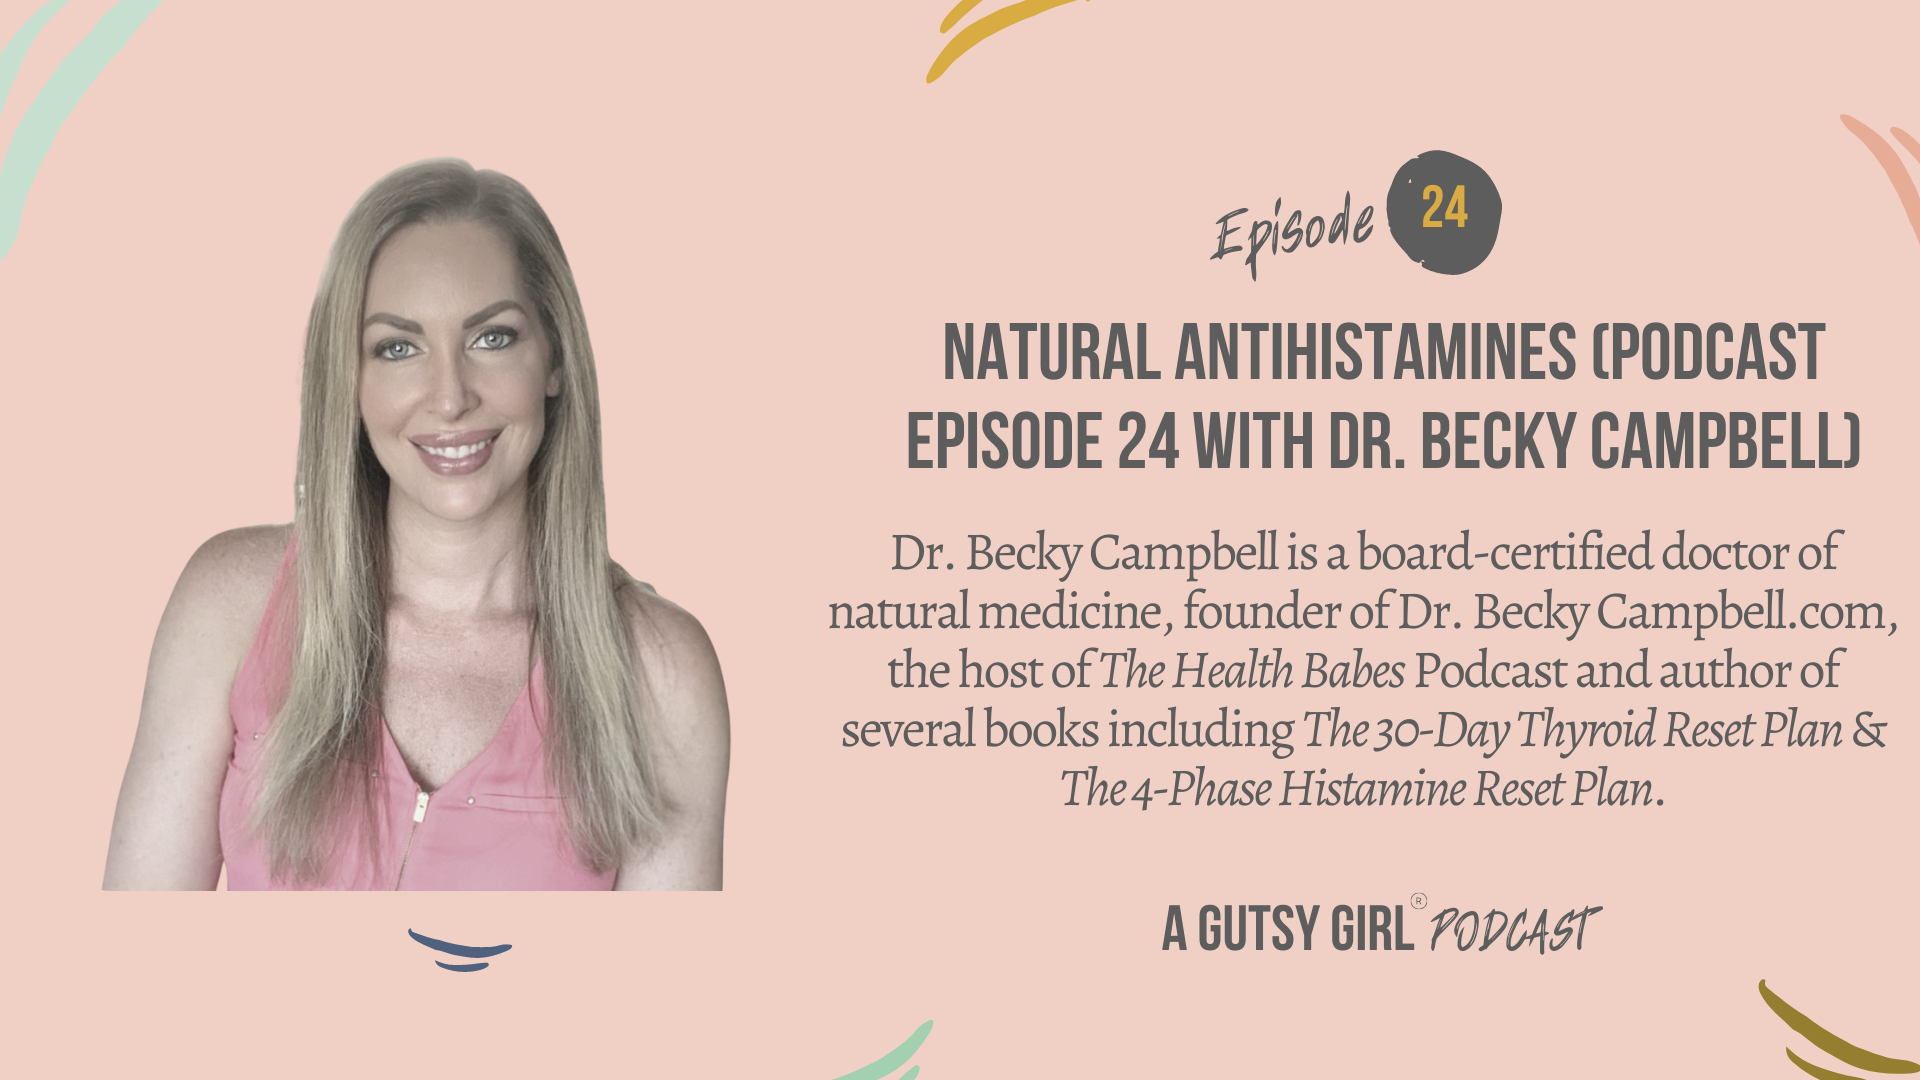 Natural Antihistamines (Podcast Episode 24 with Dr. Becky Campbell)